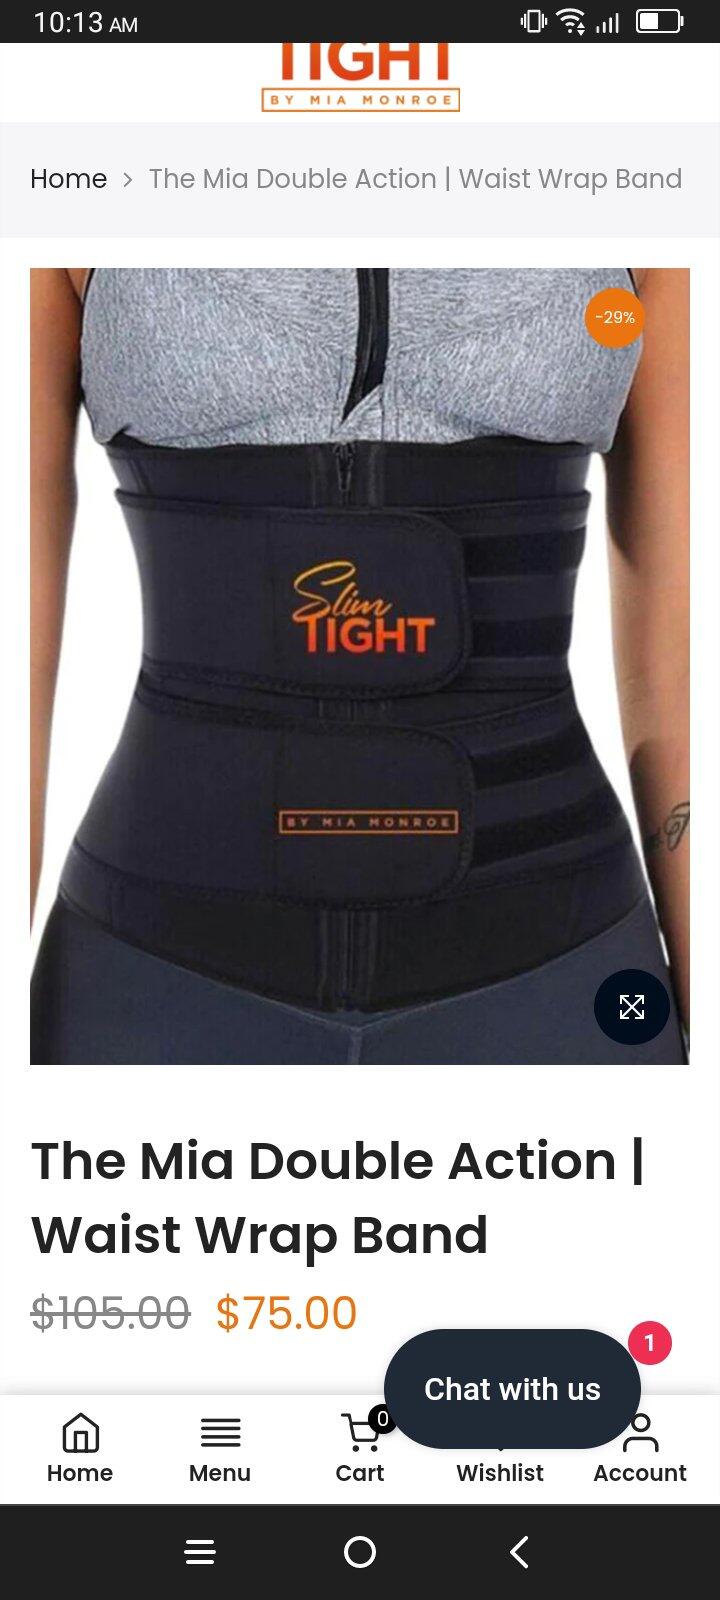 The Mia Double Action Waist Trainer